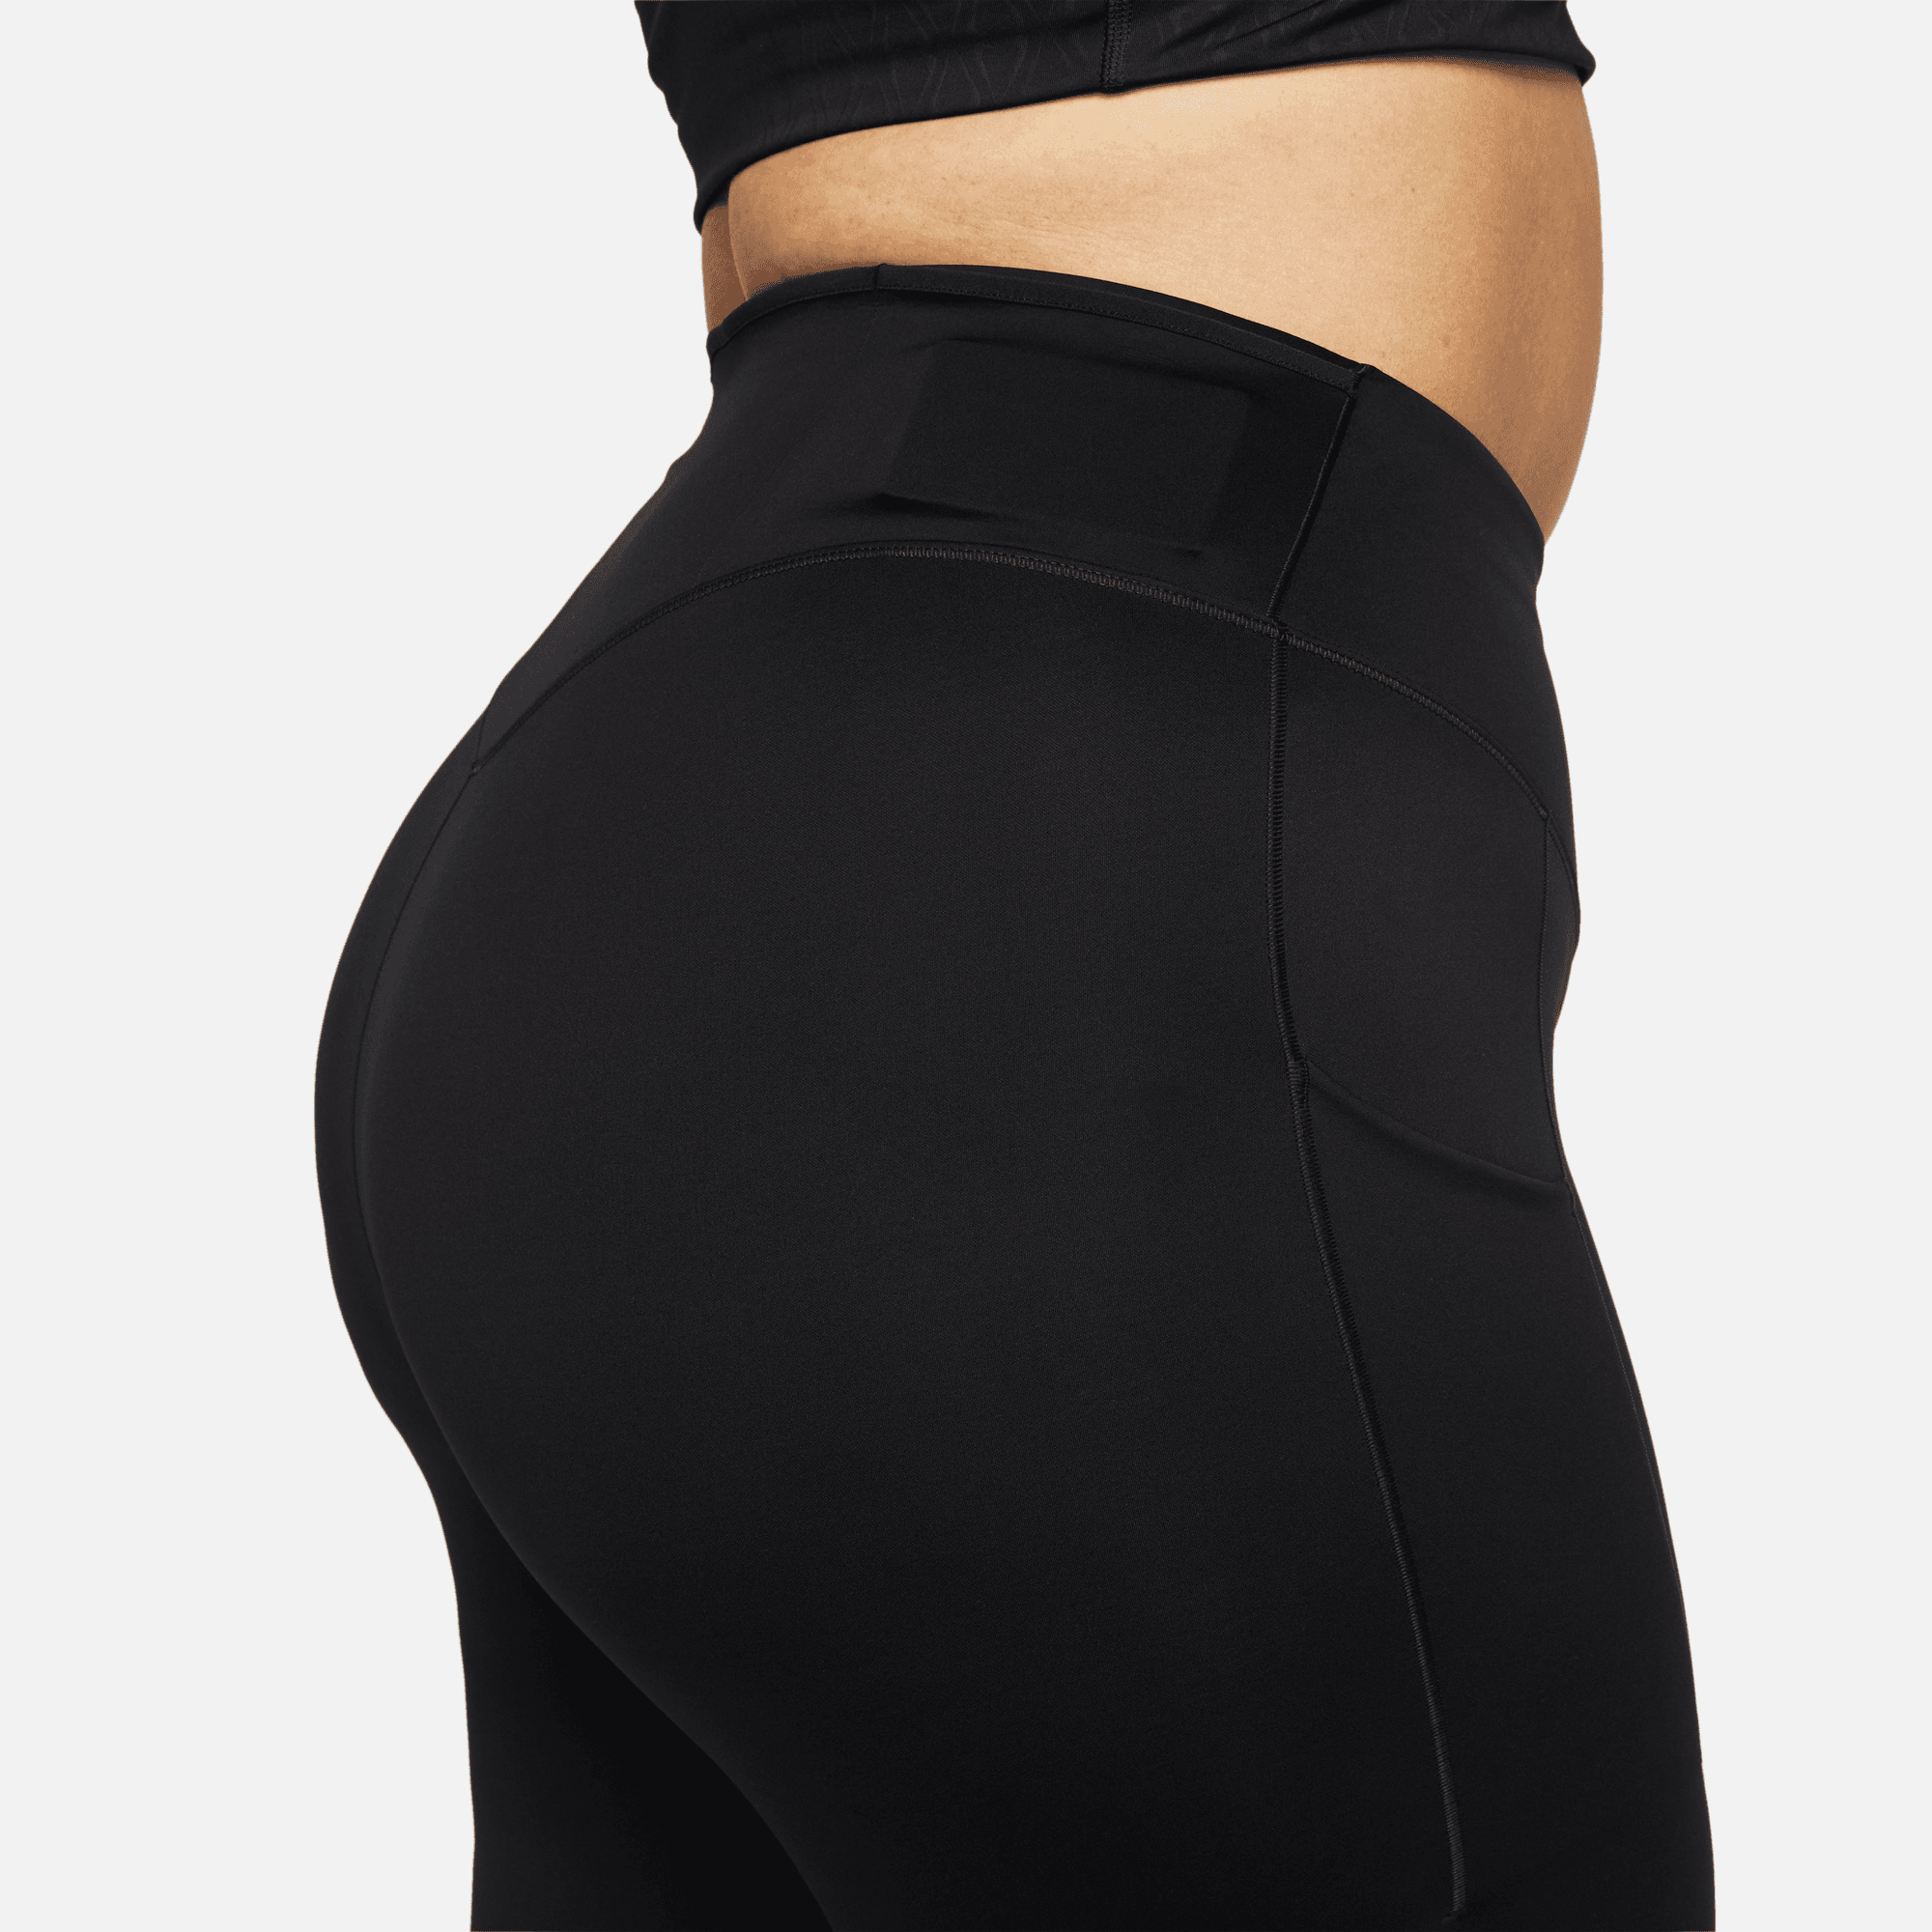 NIKE GO WOMEN'S FIRM-SUPPORT HIGH-WAISTED 8 BIKER SHORTS WITH